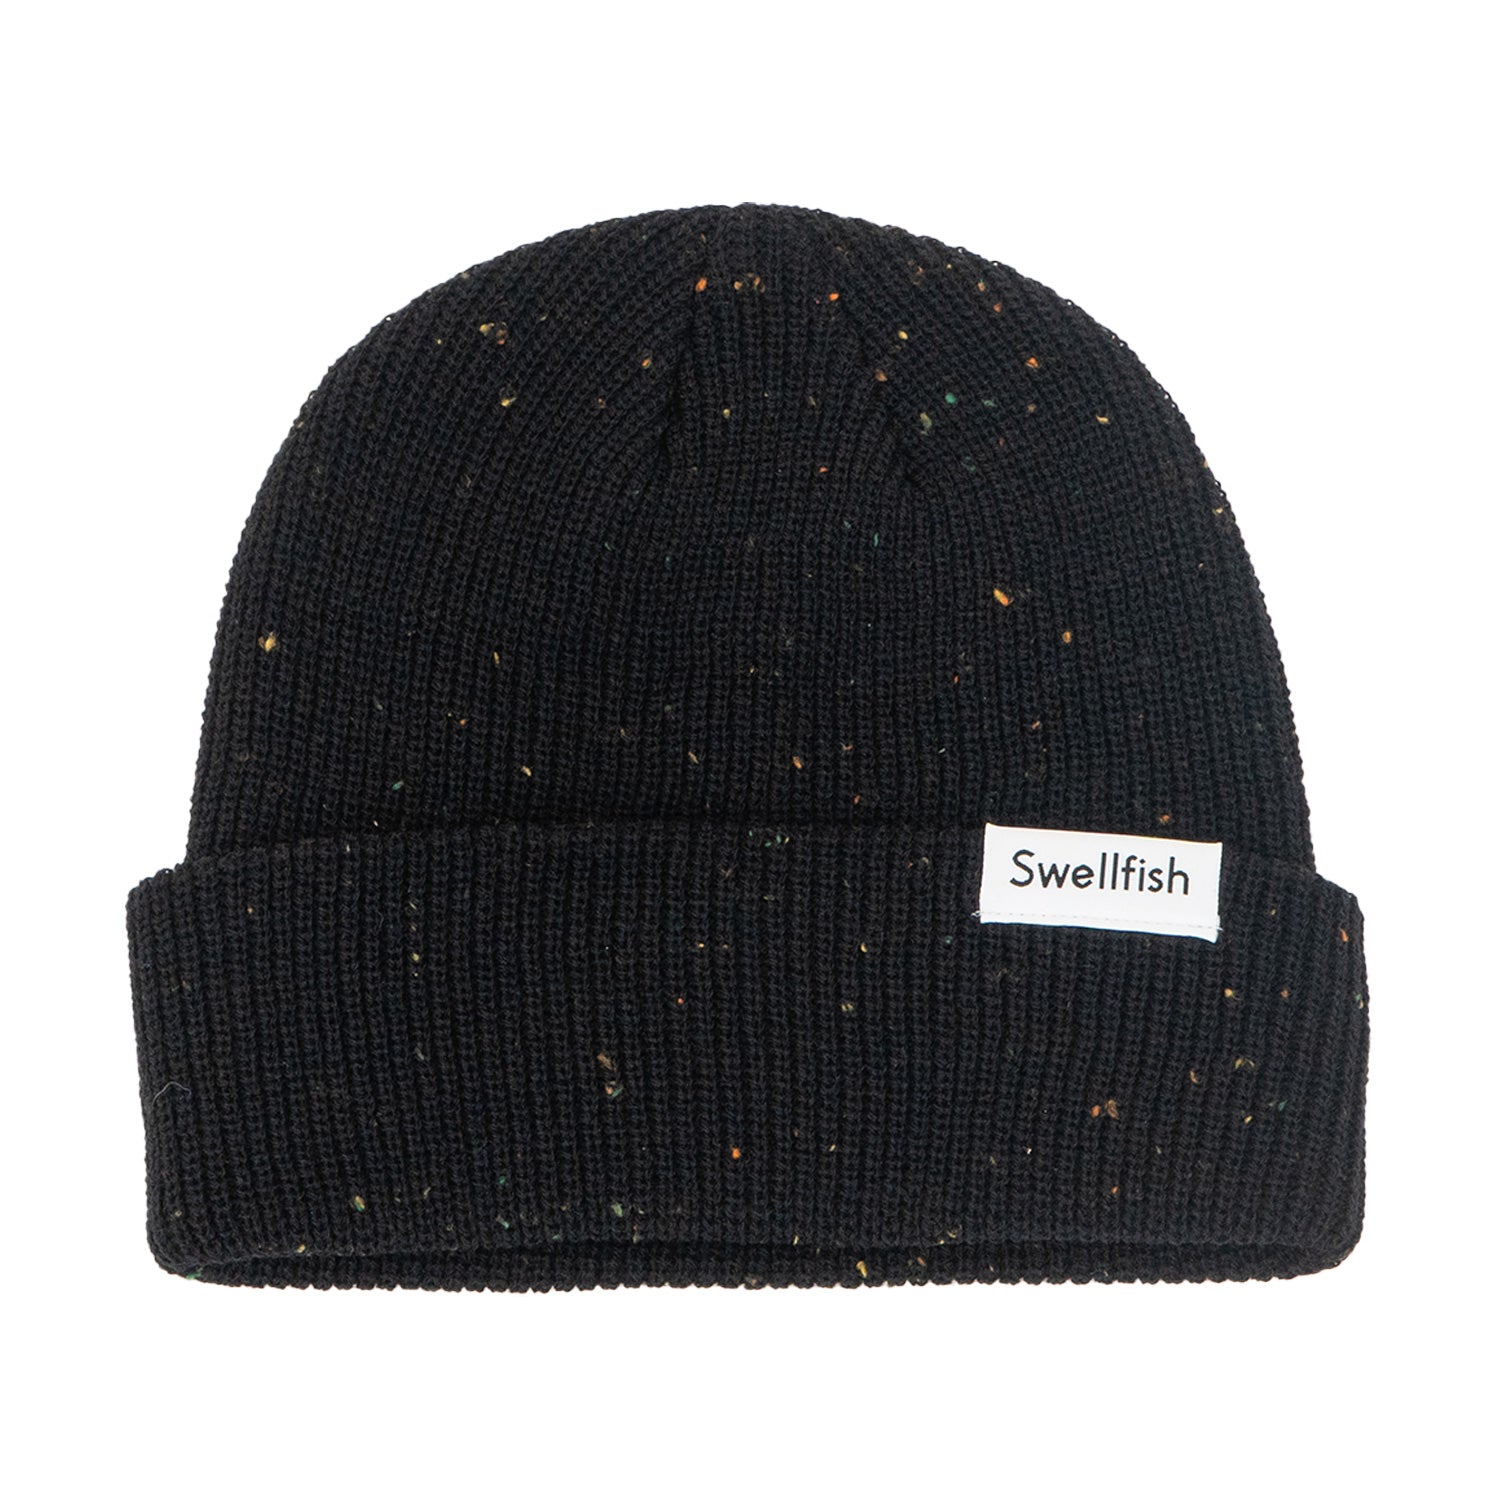 The Black Speckled Zissou Captains Beanie - Swellfish Outdoor Equipment Co.